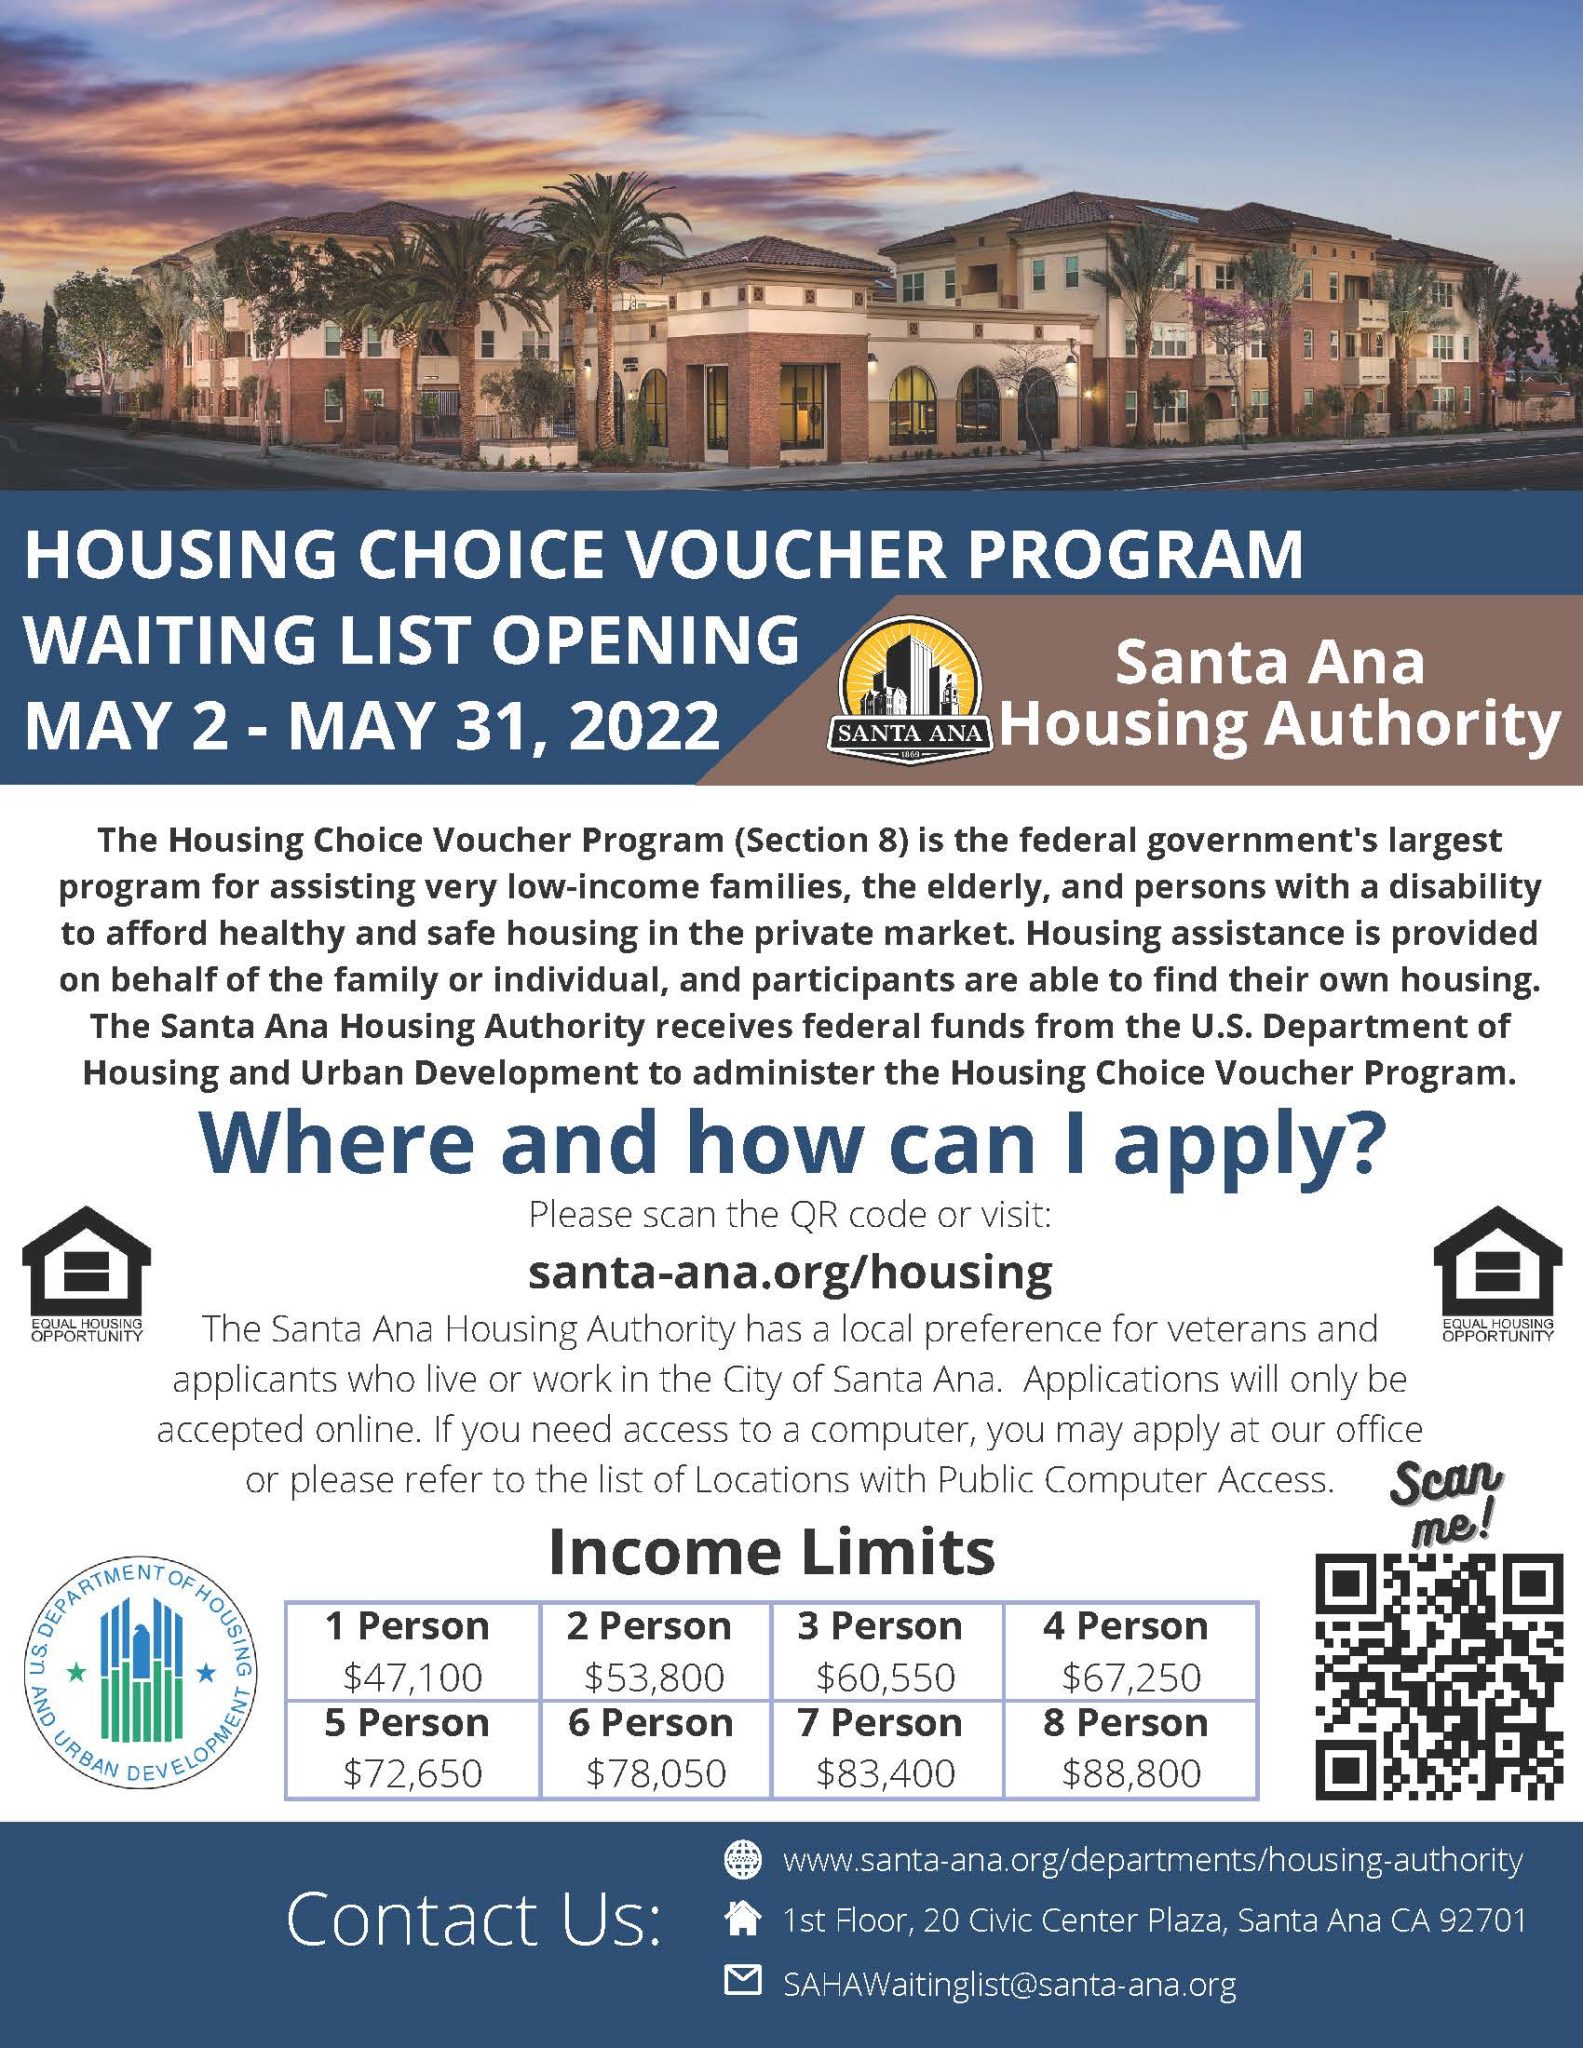 Housing Authority accepting applications beginning May 2, 2022 City